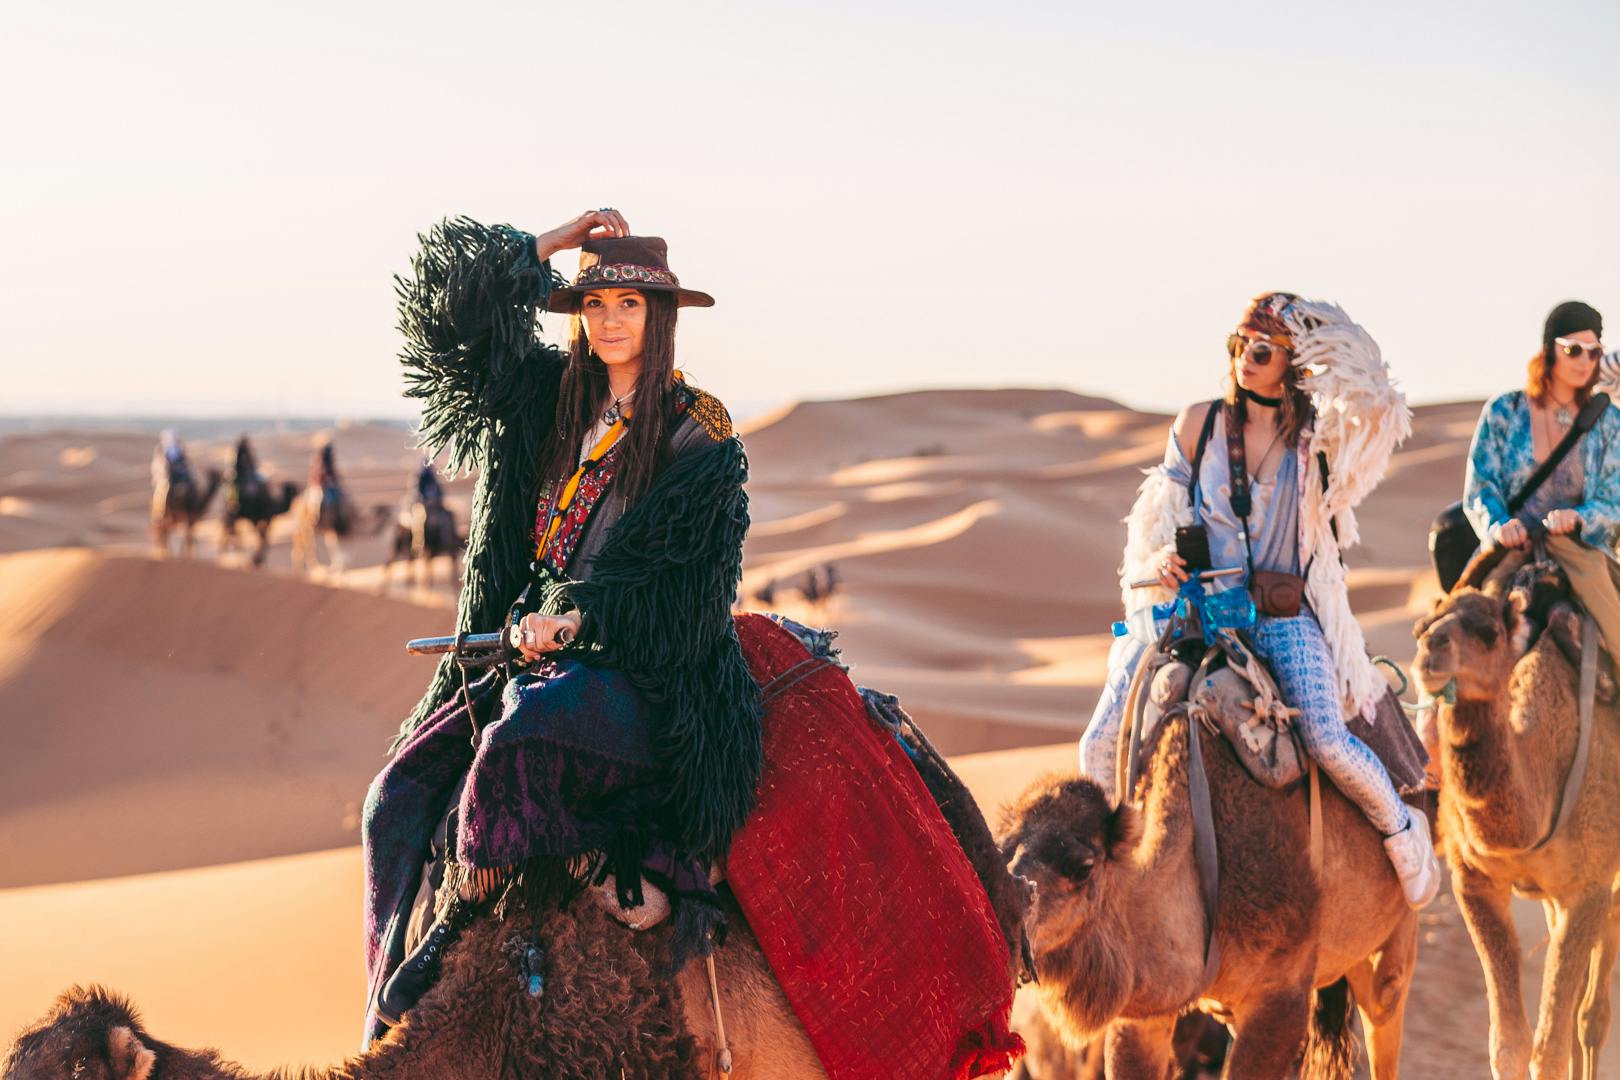 Women riding camels in the desert